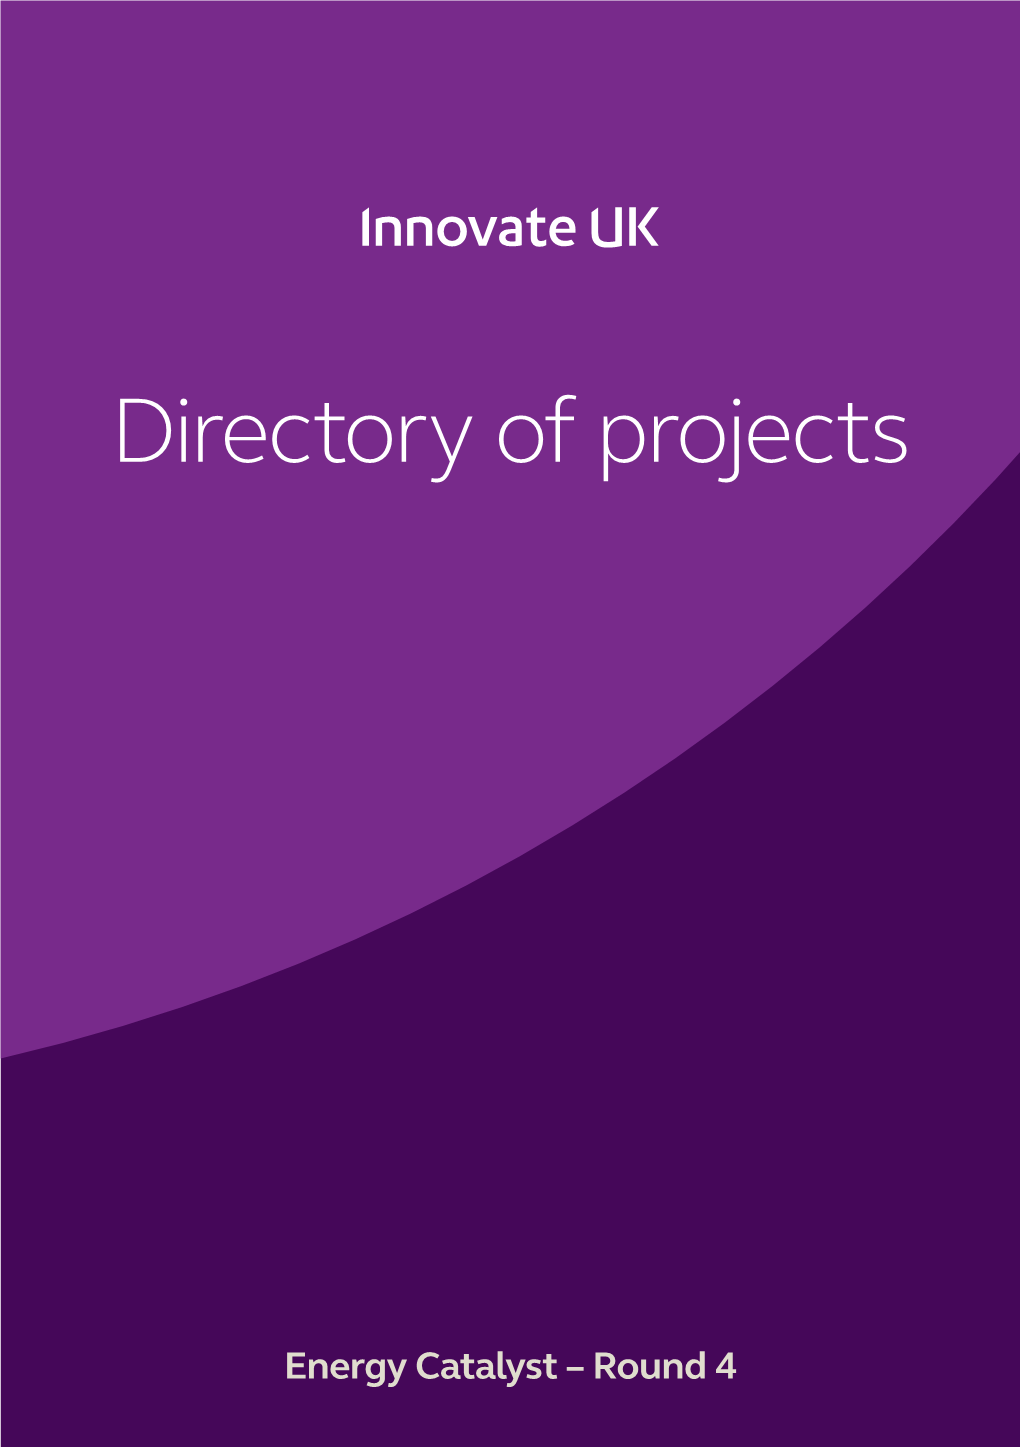 Innovate-UK-Energy-Catalyst-Round-4-Directory-Of-Projects